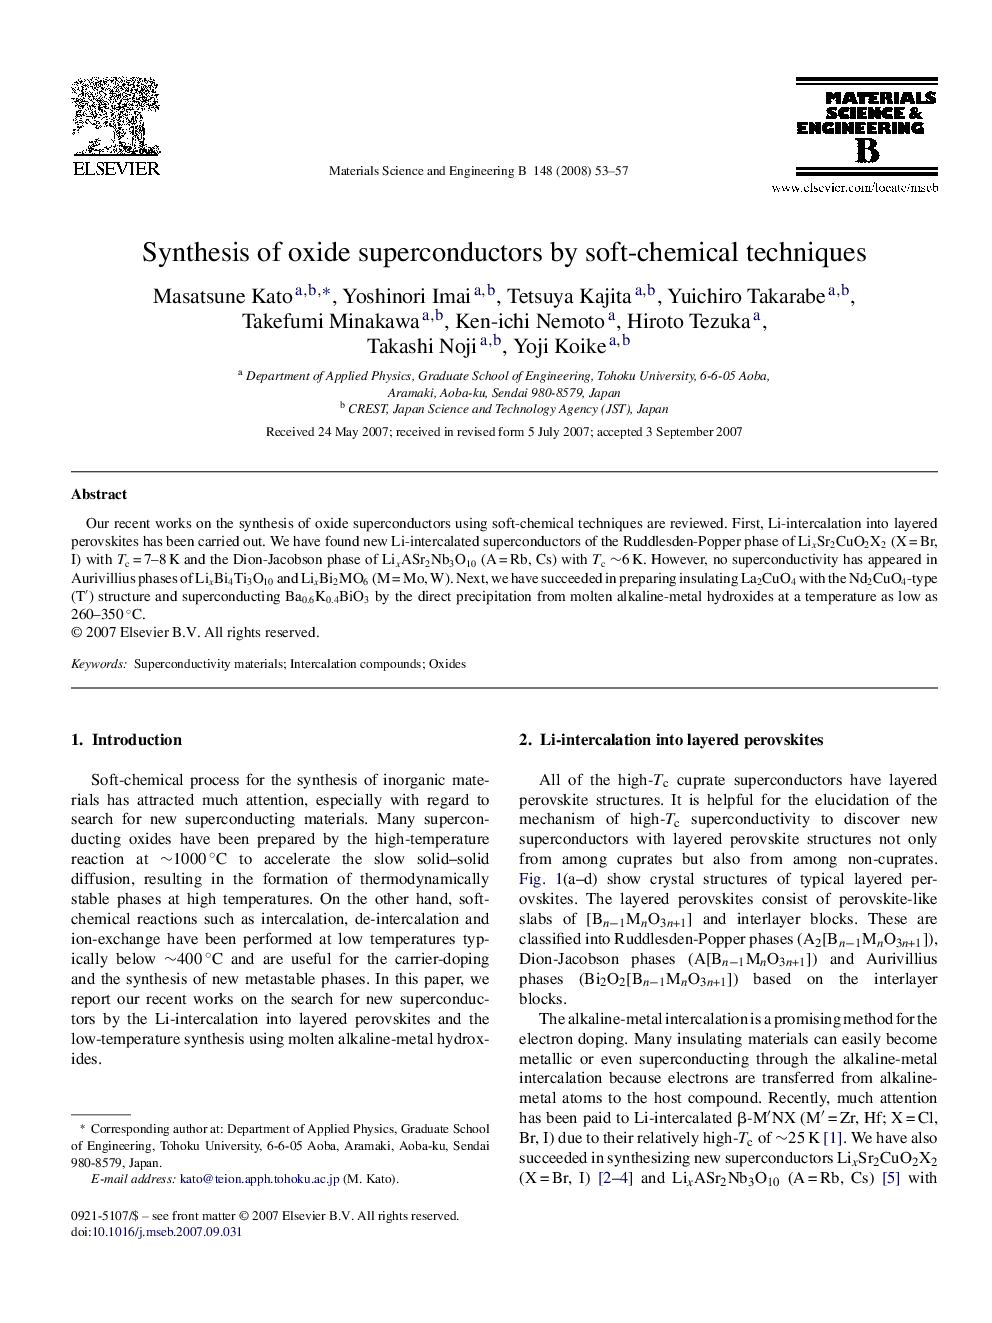 Synthesis of oxide superconductors by soft-chemical techniques